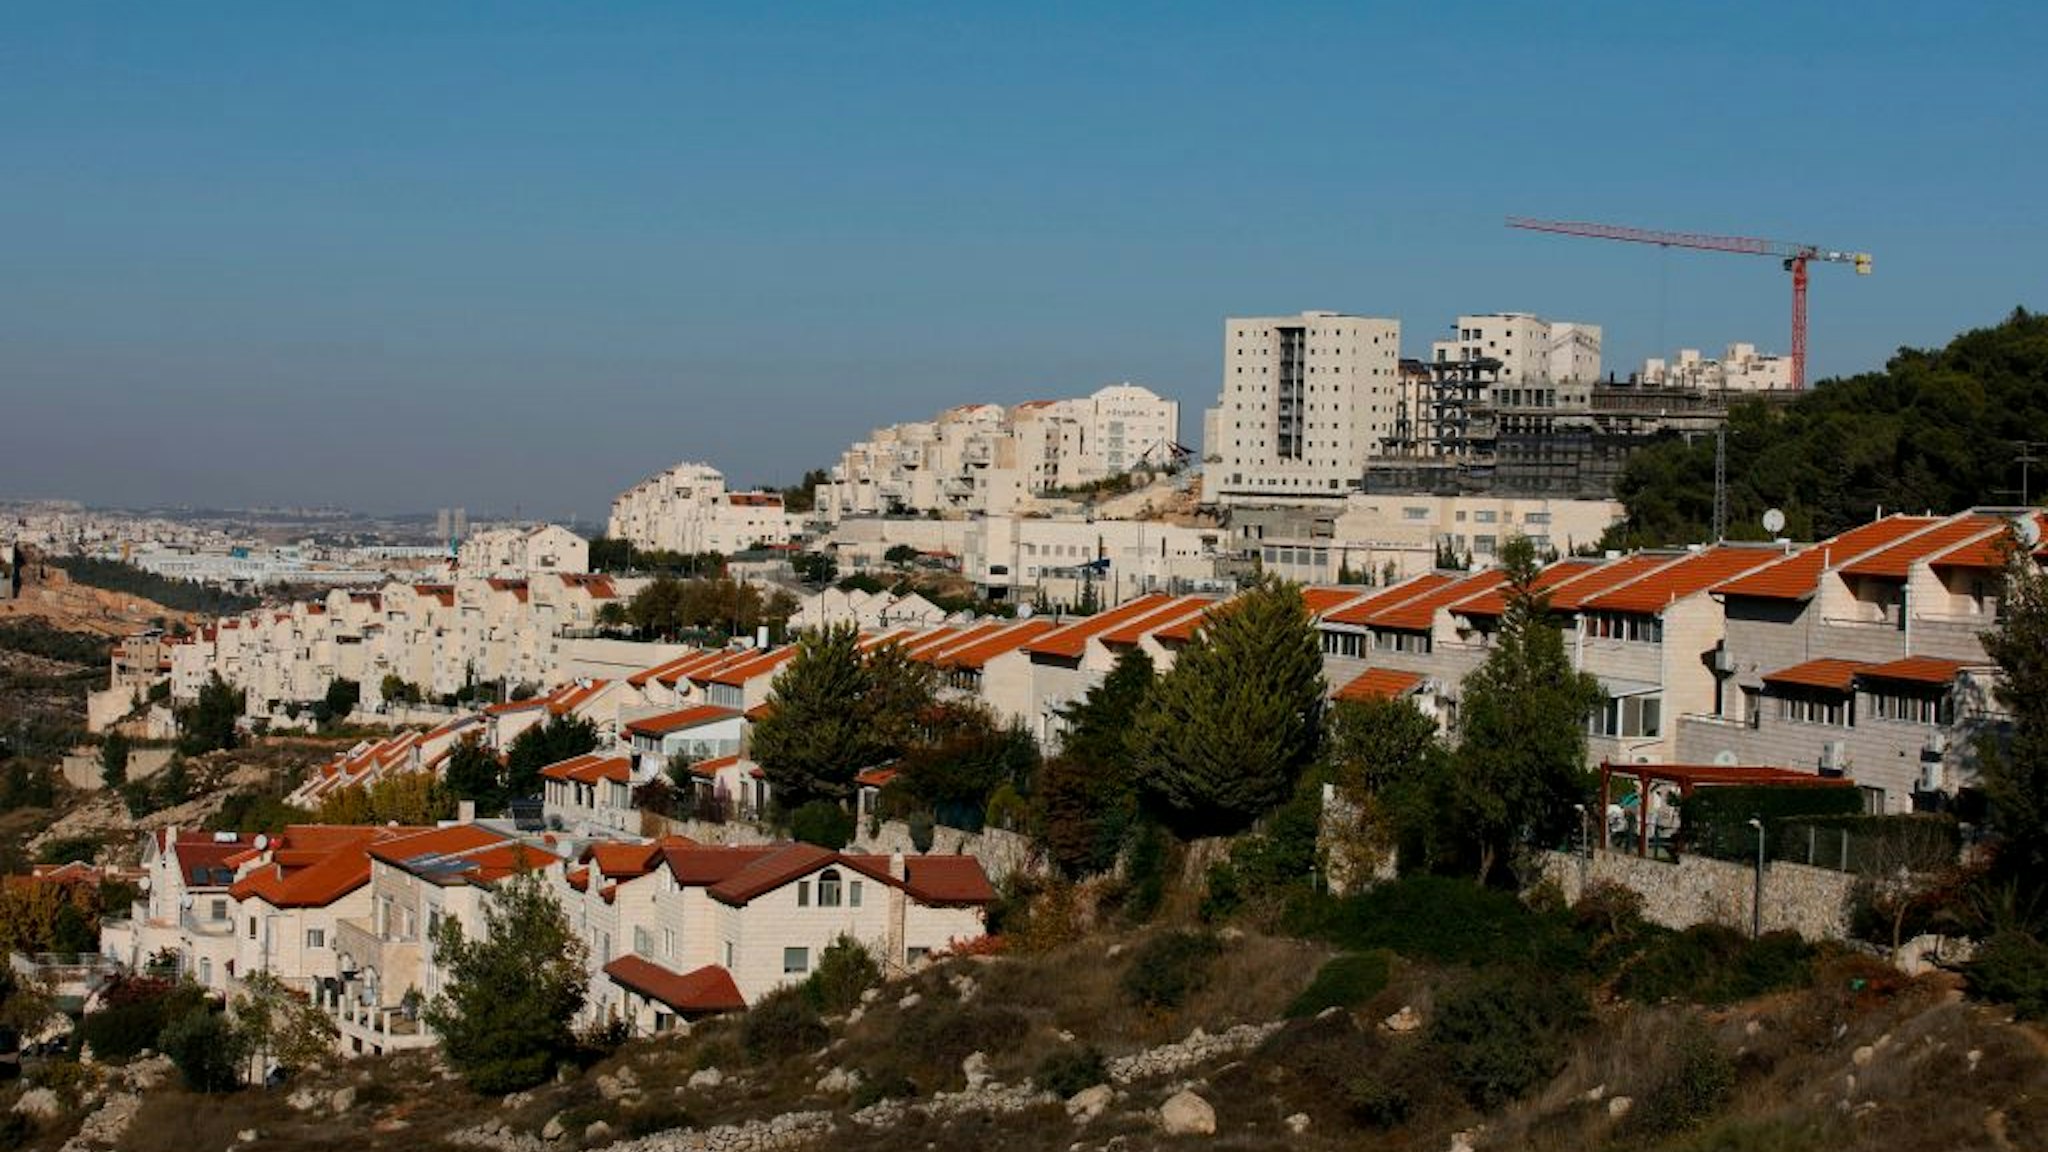 A picture taken on November 19, 2019 shows a general view of the Israeli settlement of Efrat near the Palestinian city of Bethlehem south of Jerusalem, in the occupied West Bank. - Israeli Prime Minister Benjamin Netanyahu said a US statement deeming Israeli settlement not to be illegal "rights a historical wrong". But the Palestinian Authority decried the US policy shift as "completely against international law". Both sides were responding to an announcement by US Secretary of State Mike Pompeo on November 18 saying that Washington "no longer considers Israeli settlements to be "inconsistent with international law".